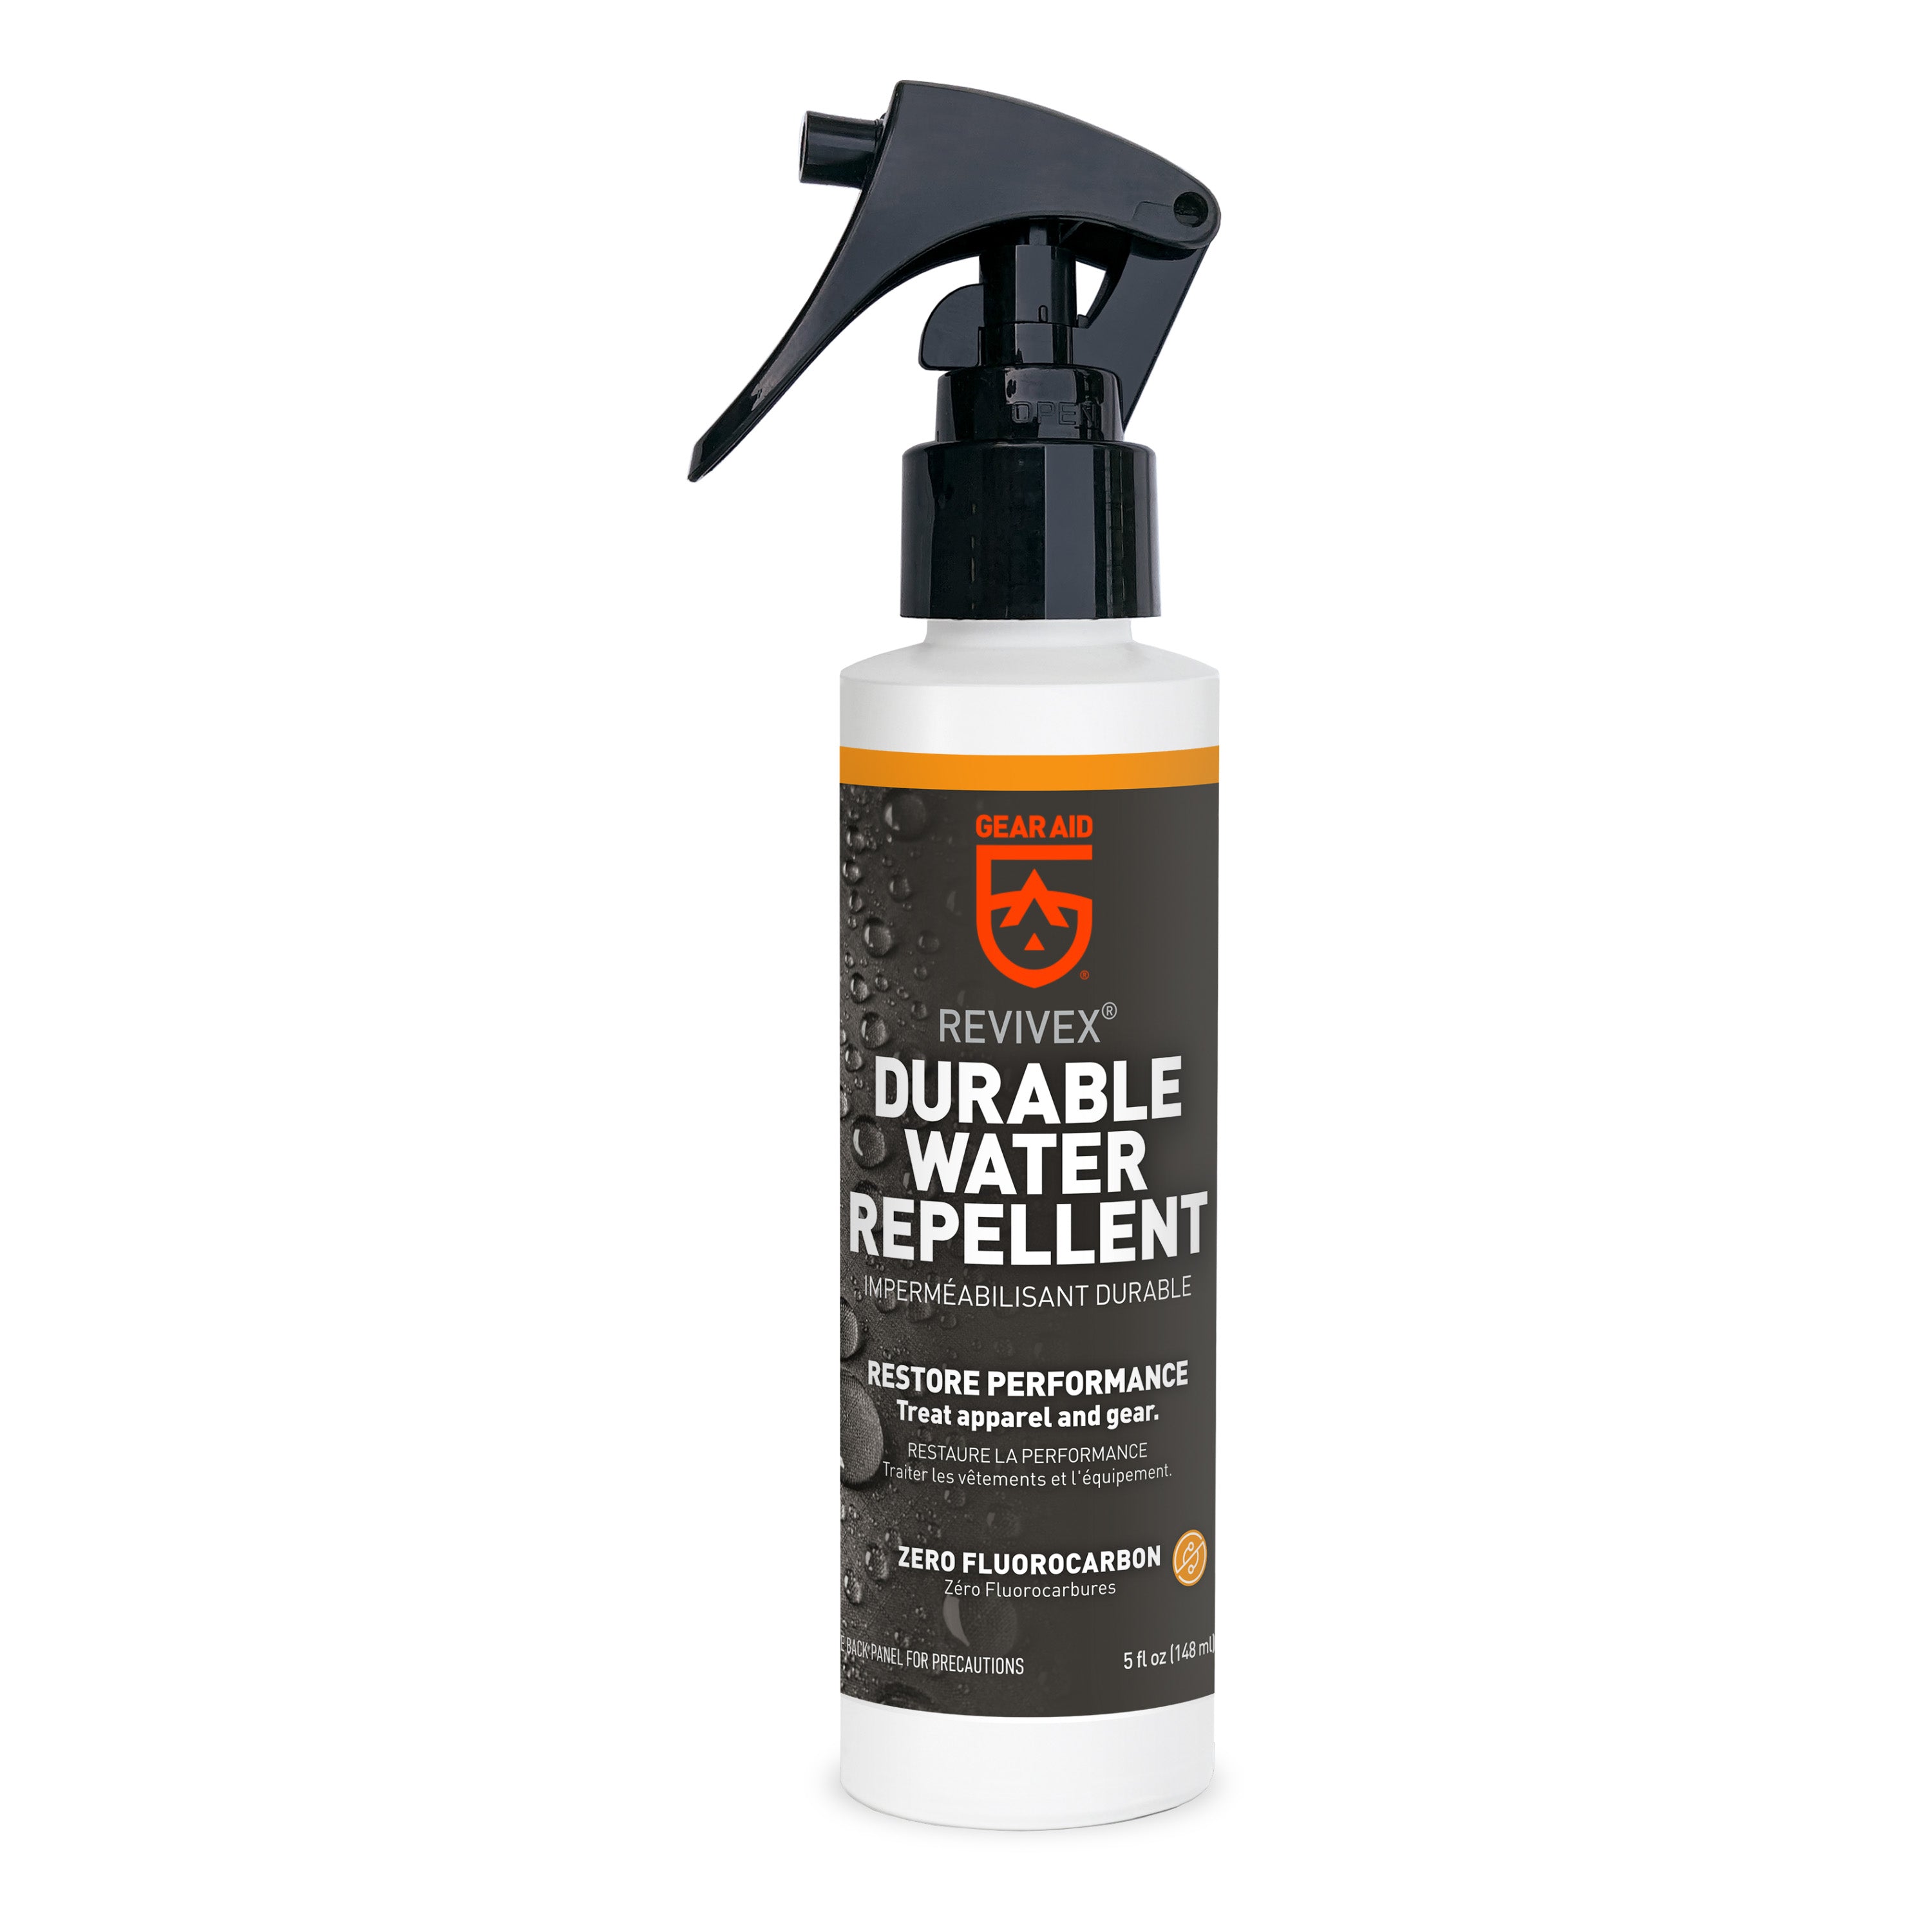 water resistant spray for fabric